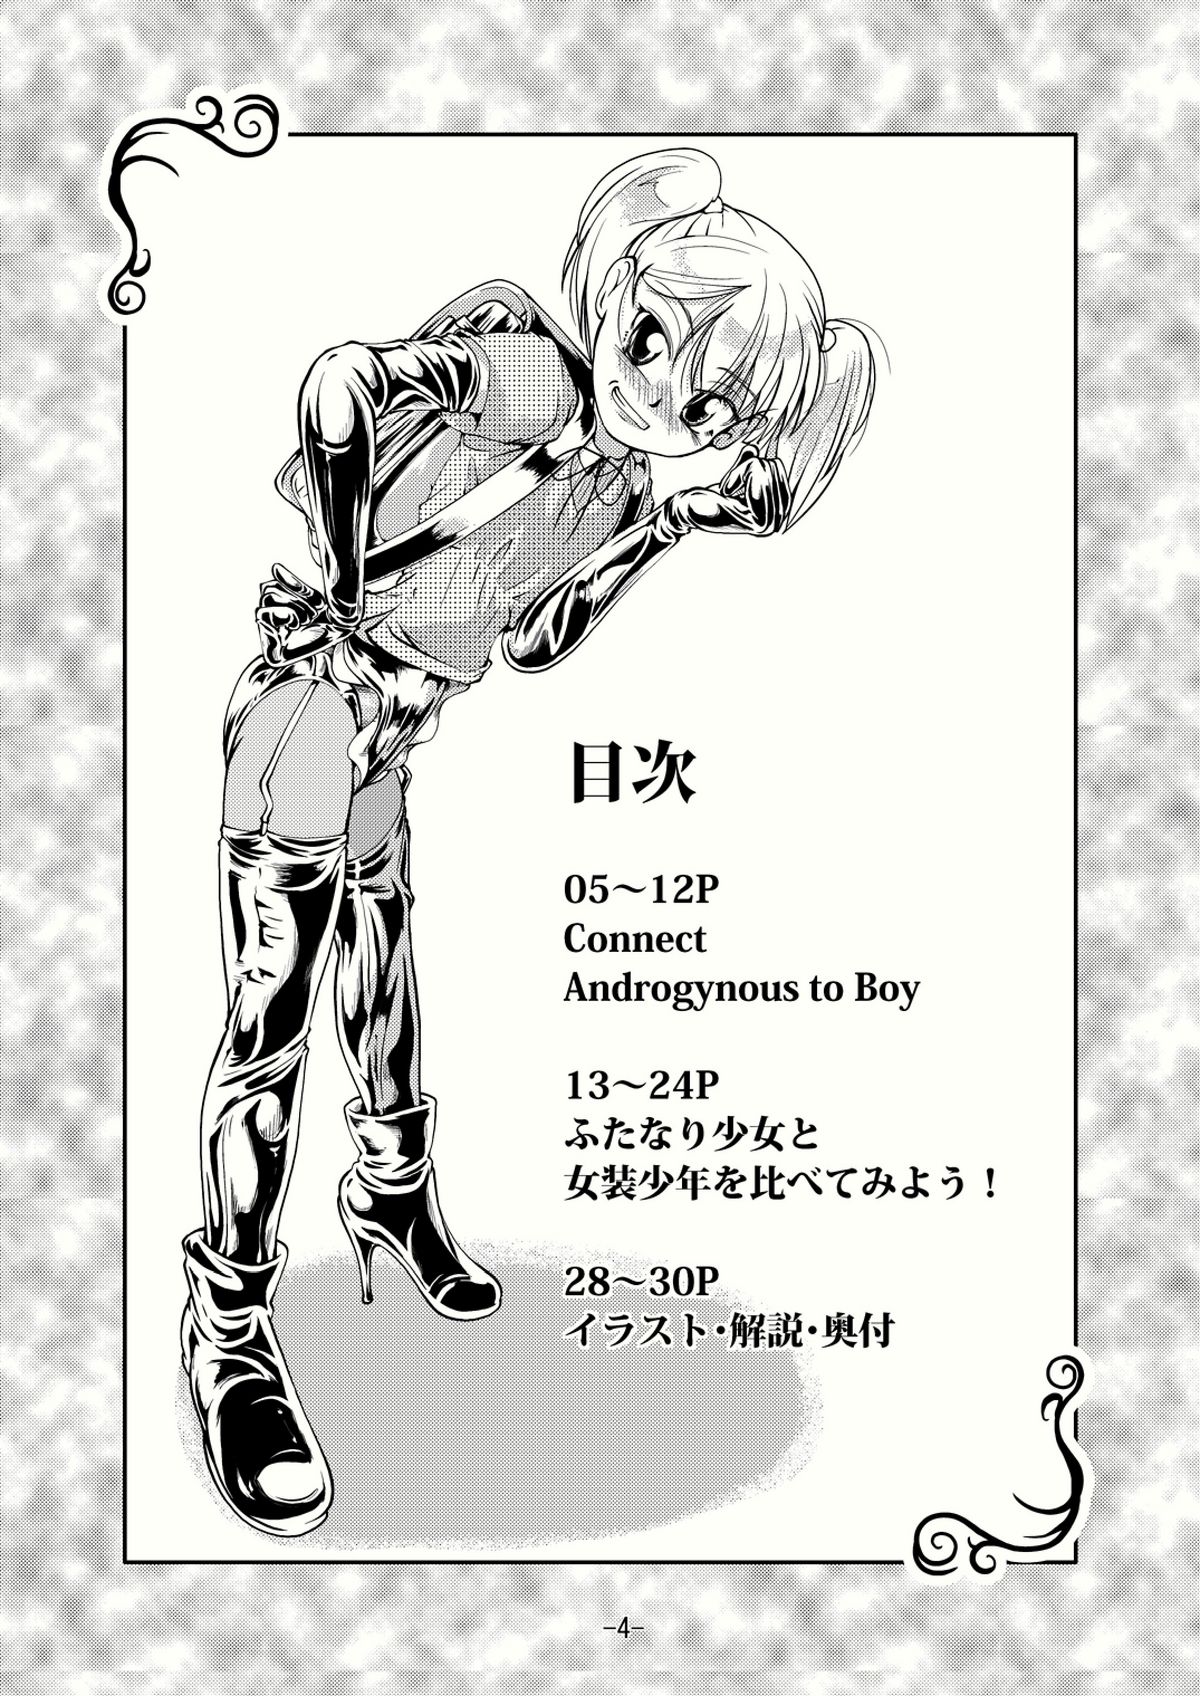 AndrogynousをBoyに接続する